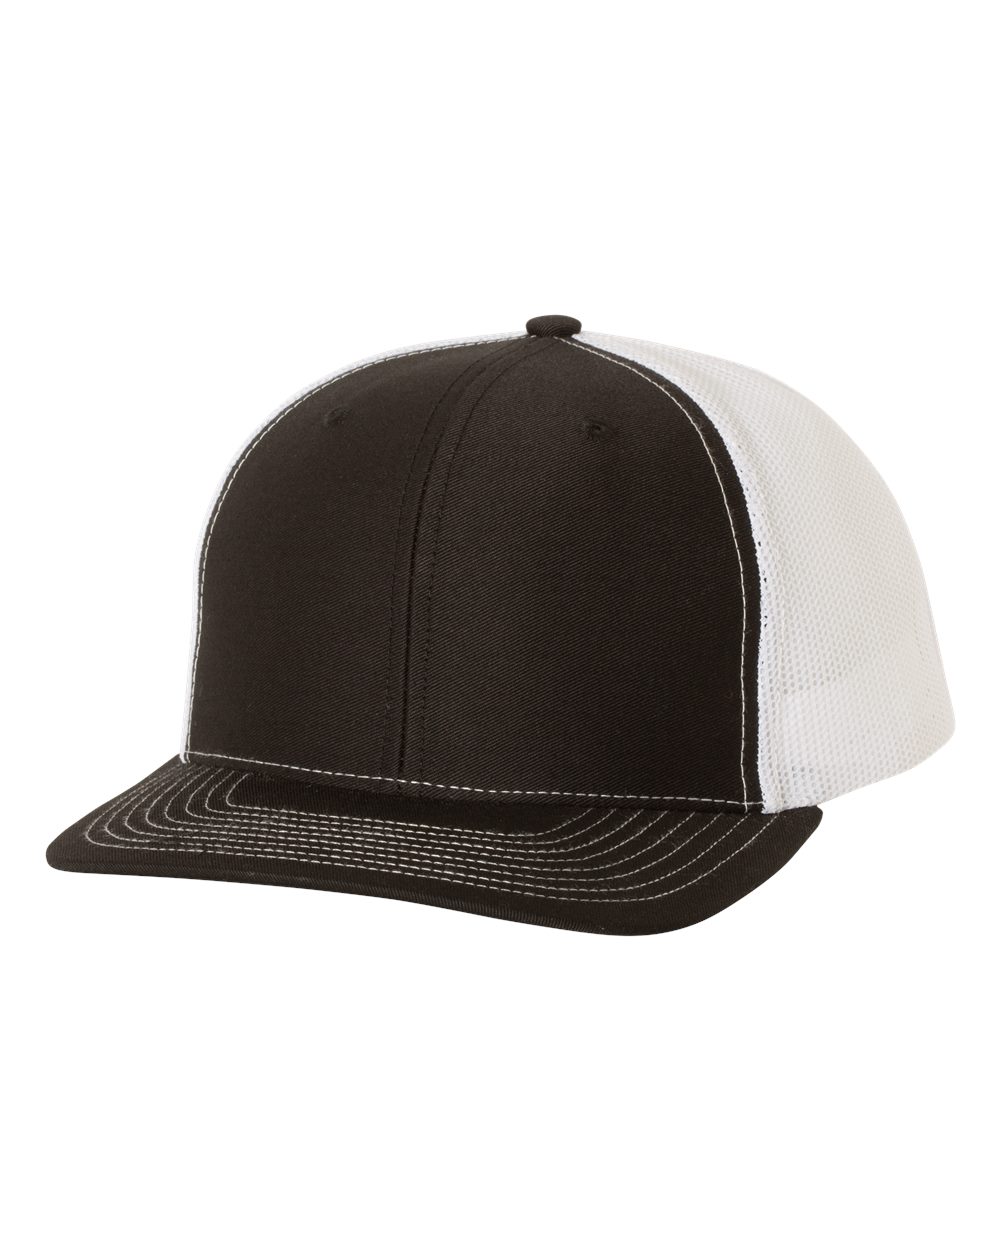 Bundle Deal: 8 Custom Leather Patch Trucker Hats for Only $99